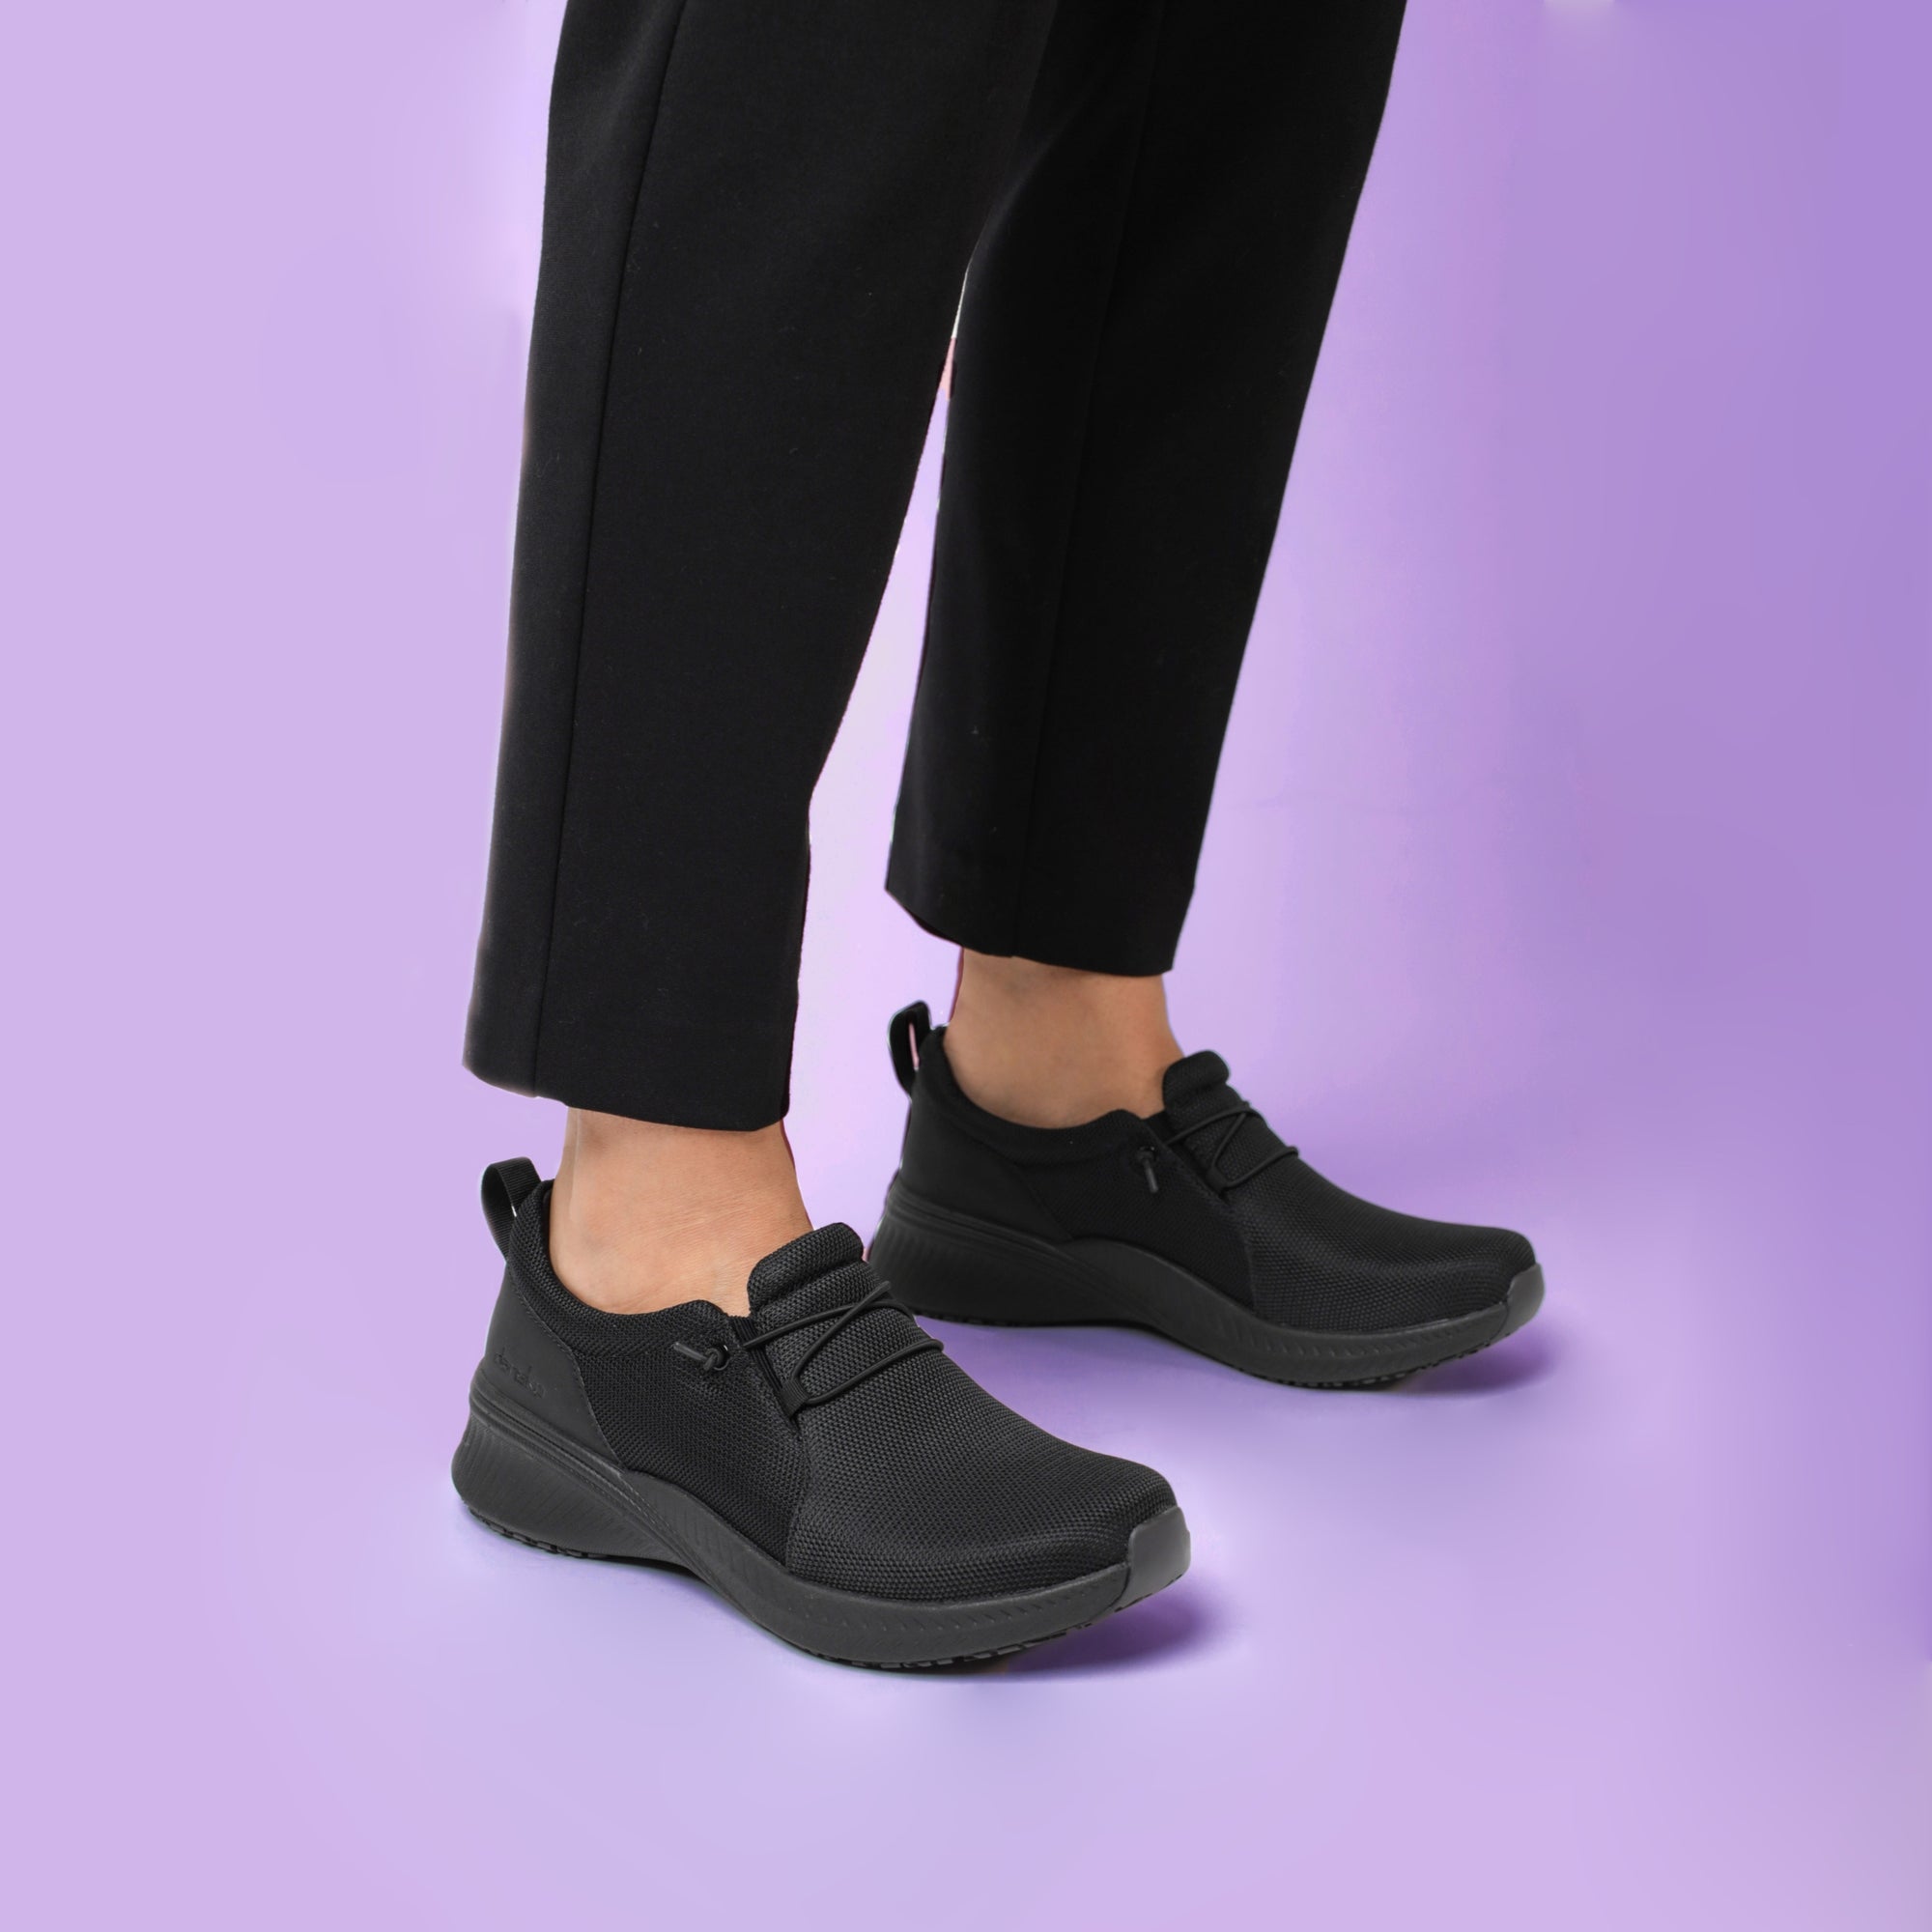 Marlee is the ultimate occupational sneaker thanks to lightweight, sustainable construction and patented slip-resistant outsoles.